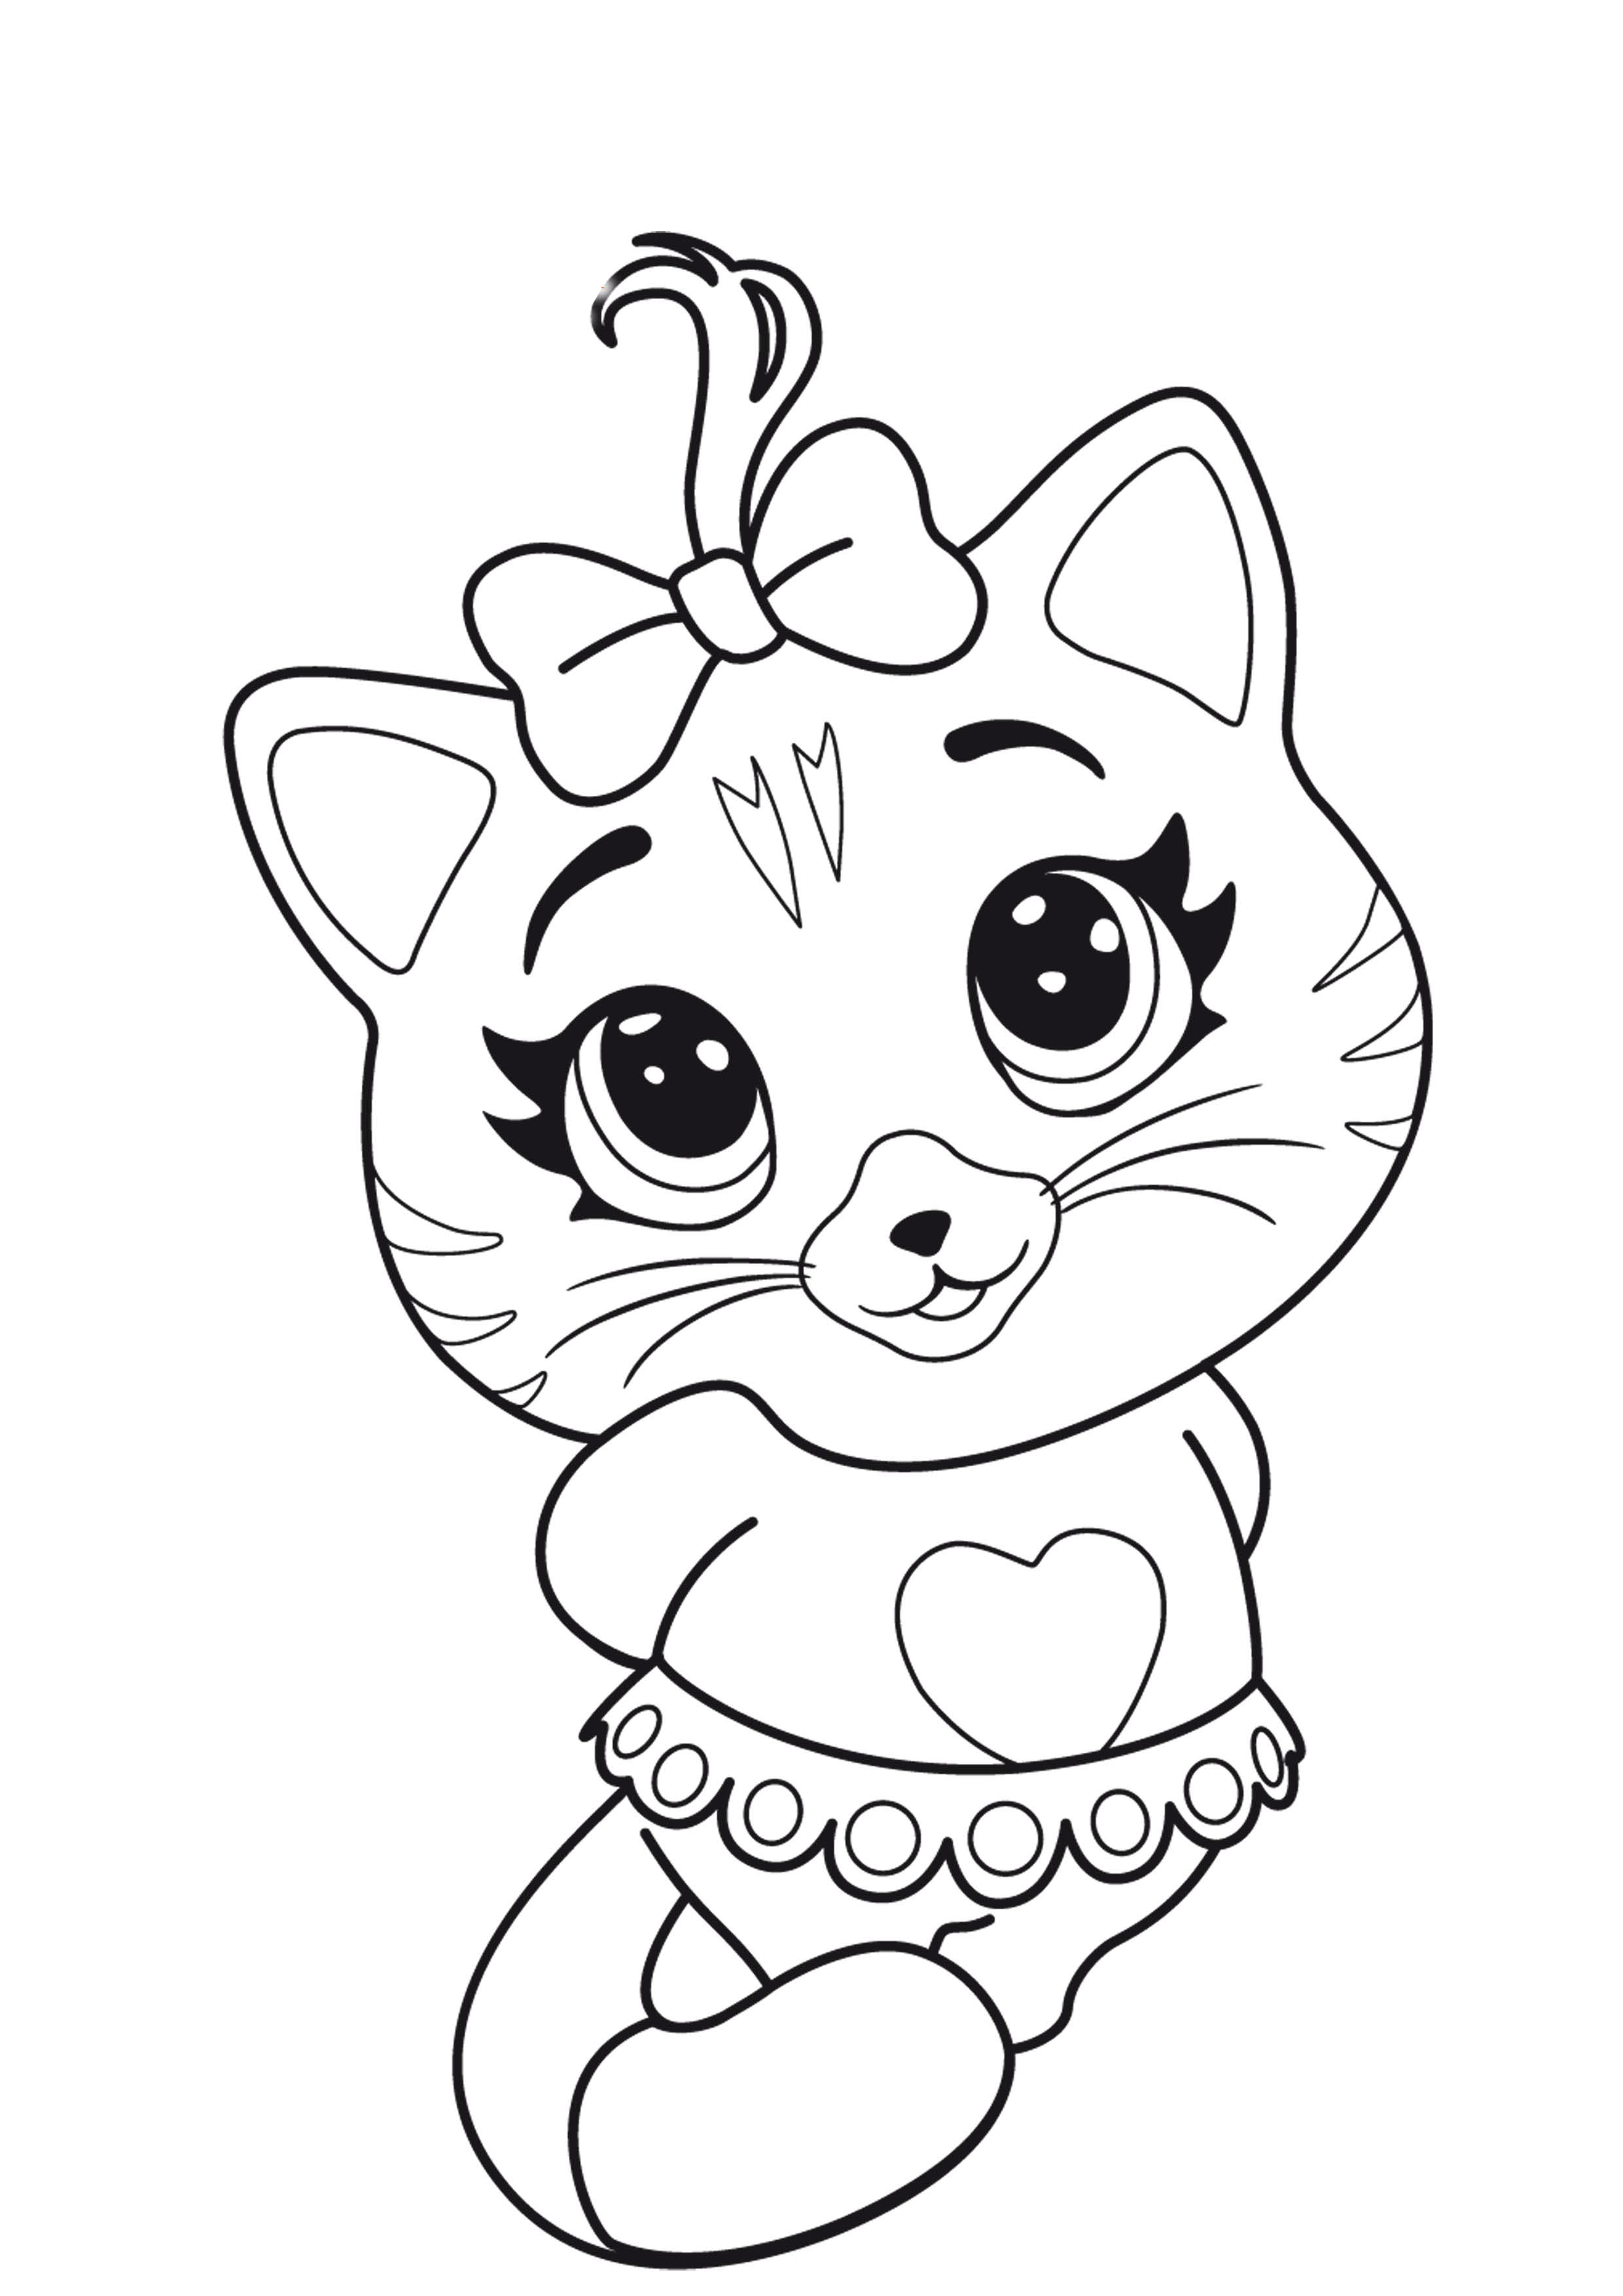 Cartoon Cat Coloring Pages Printable - Printable Word Searches